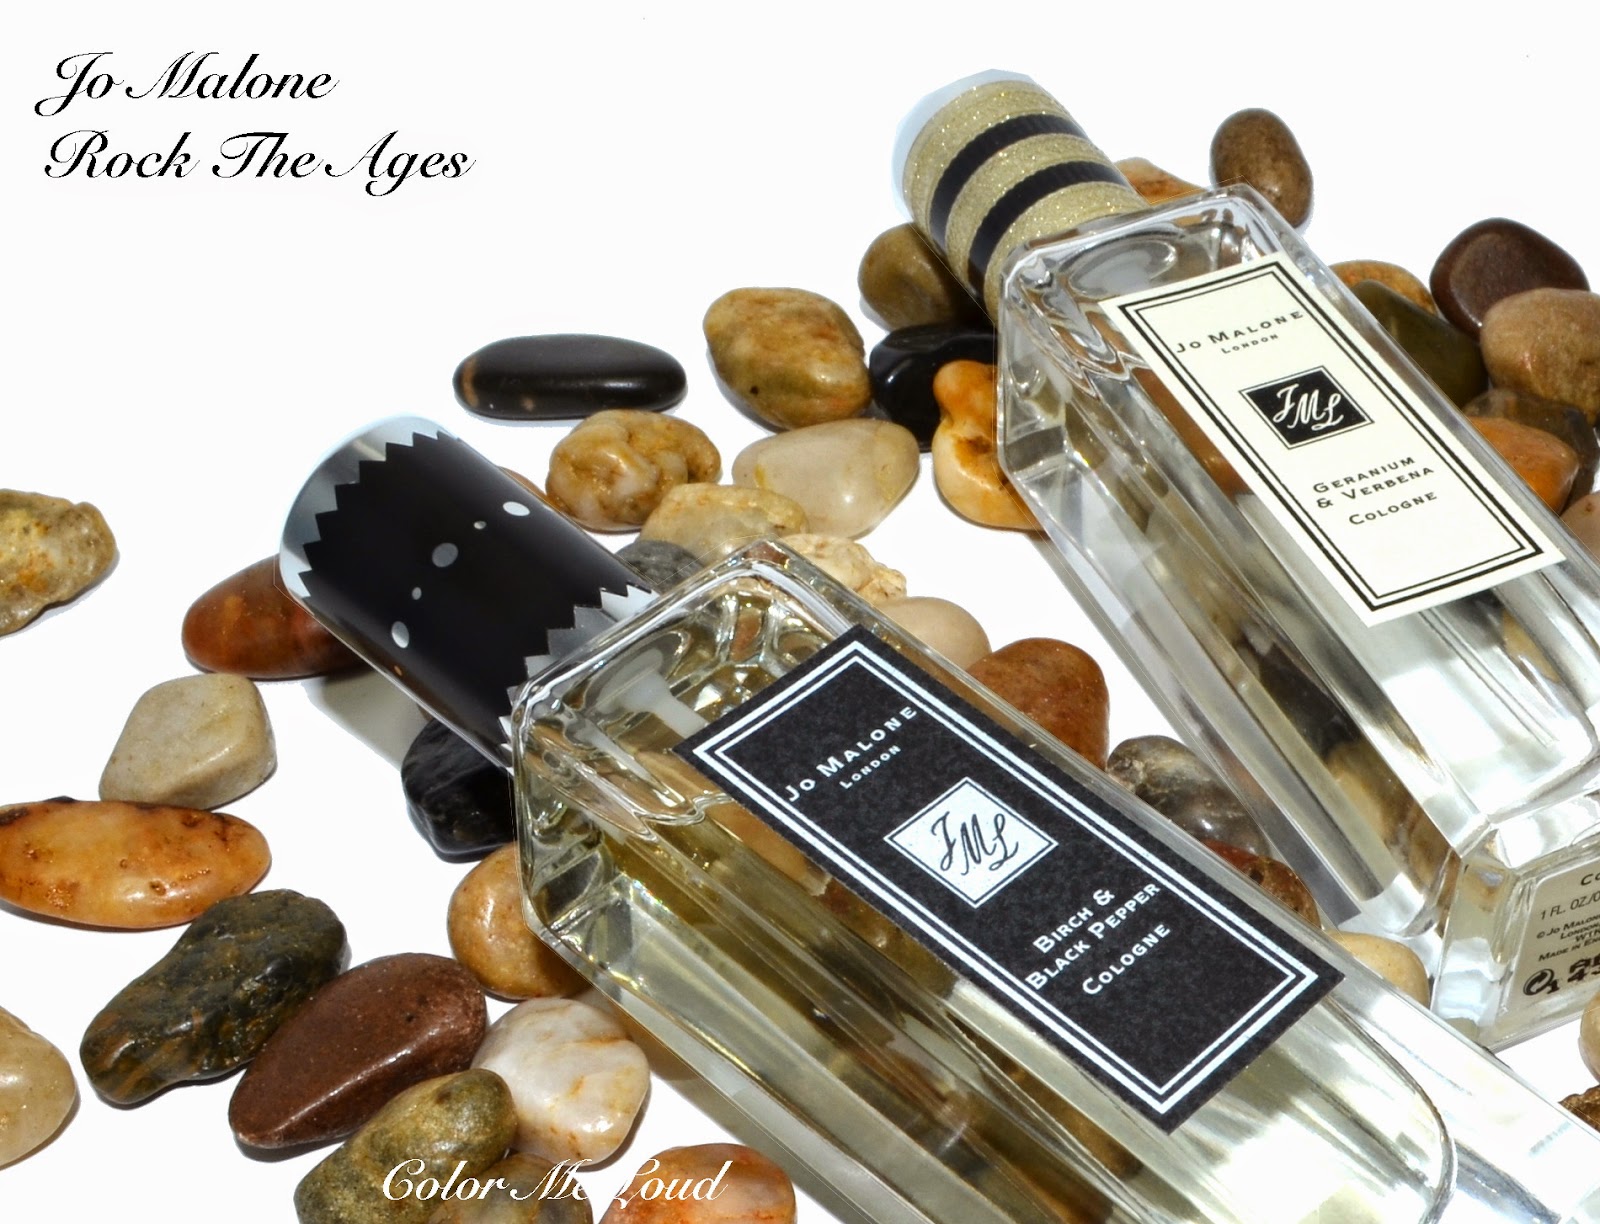 Jo Malone Geranium & Verbena and Birch & Black Pepper from Rock The Ages Collection, Review 